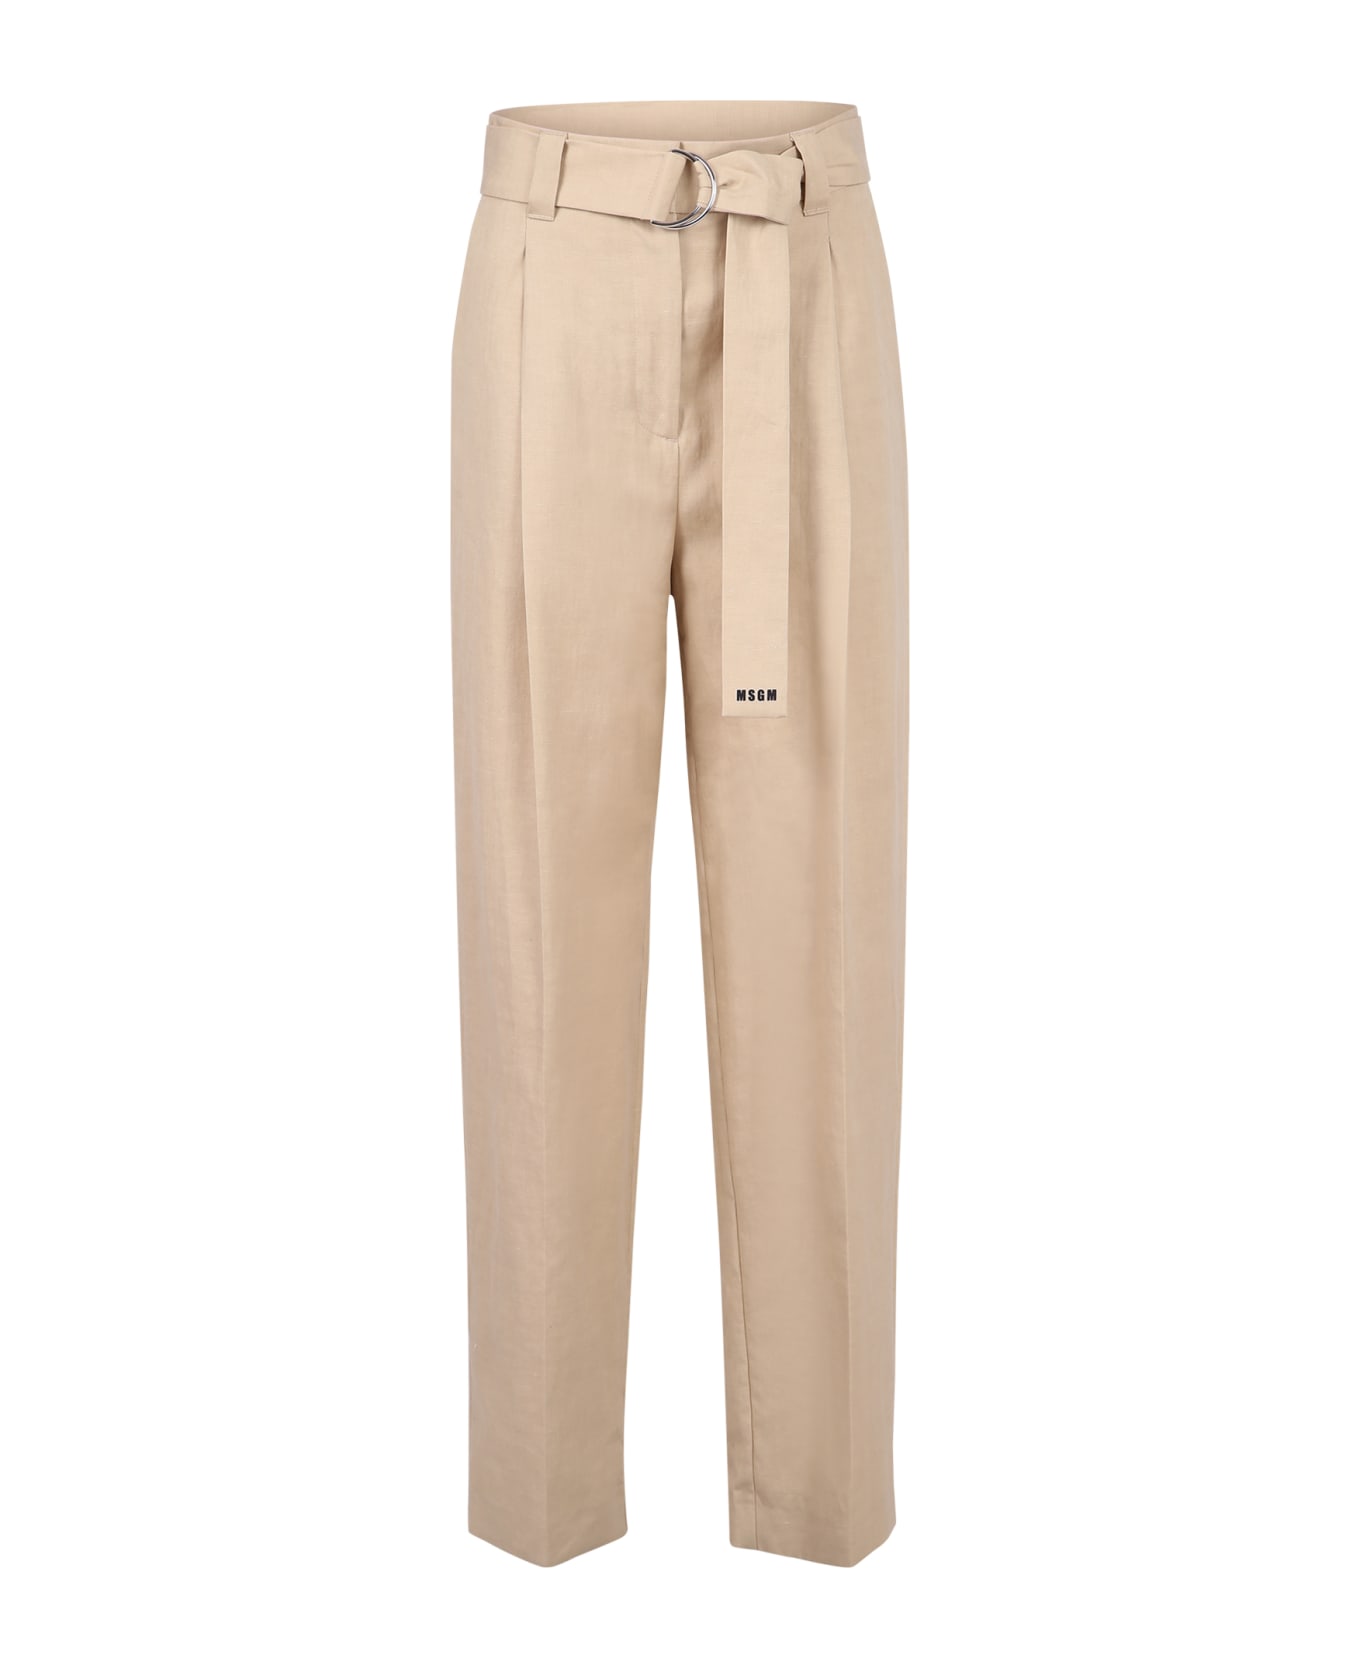 MSGM Belted Trousers - Beige